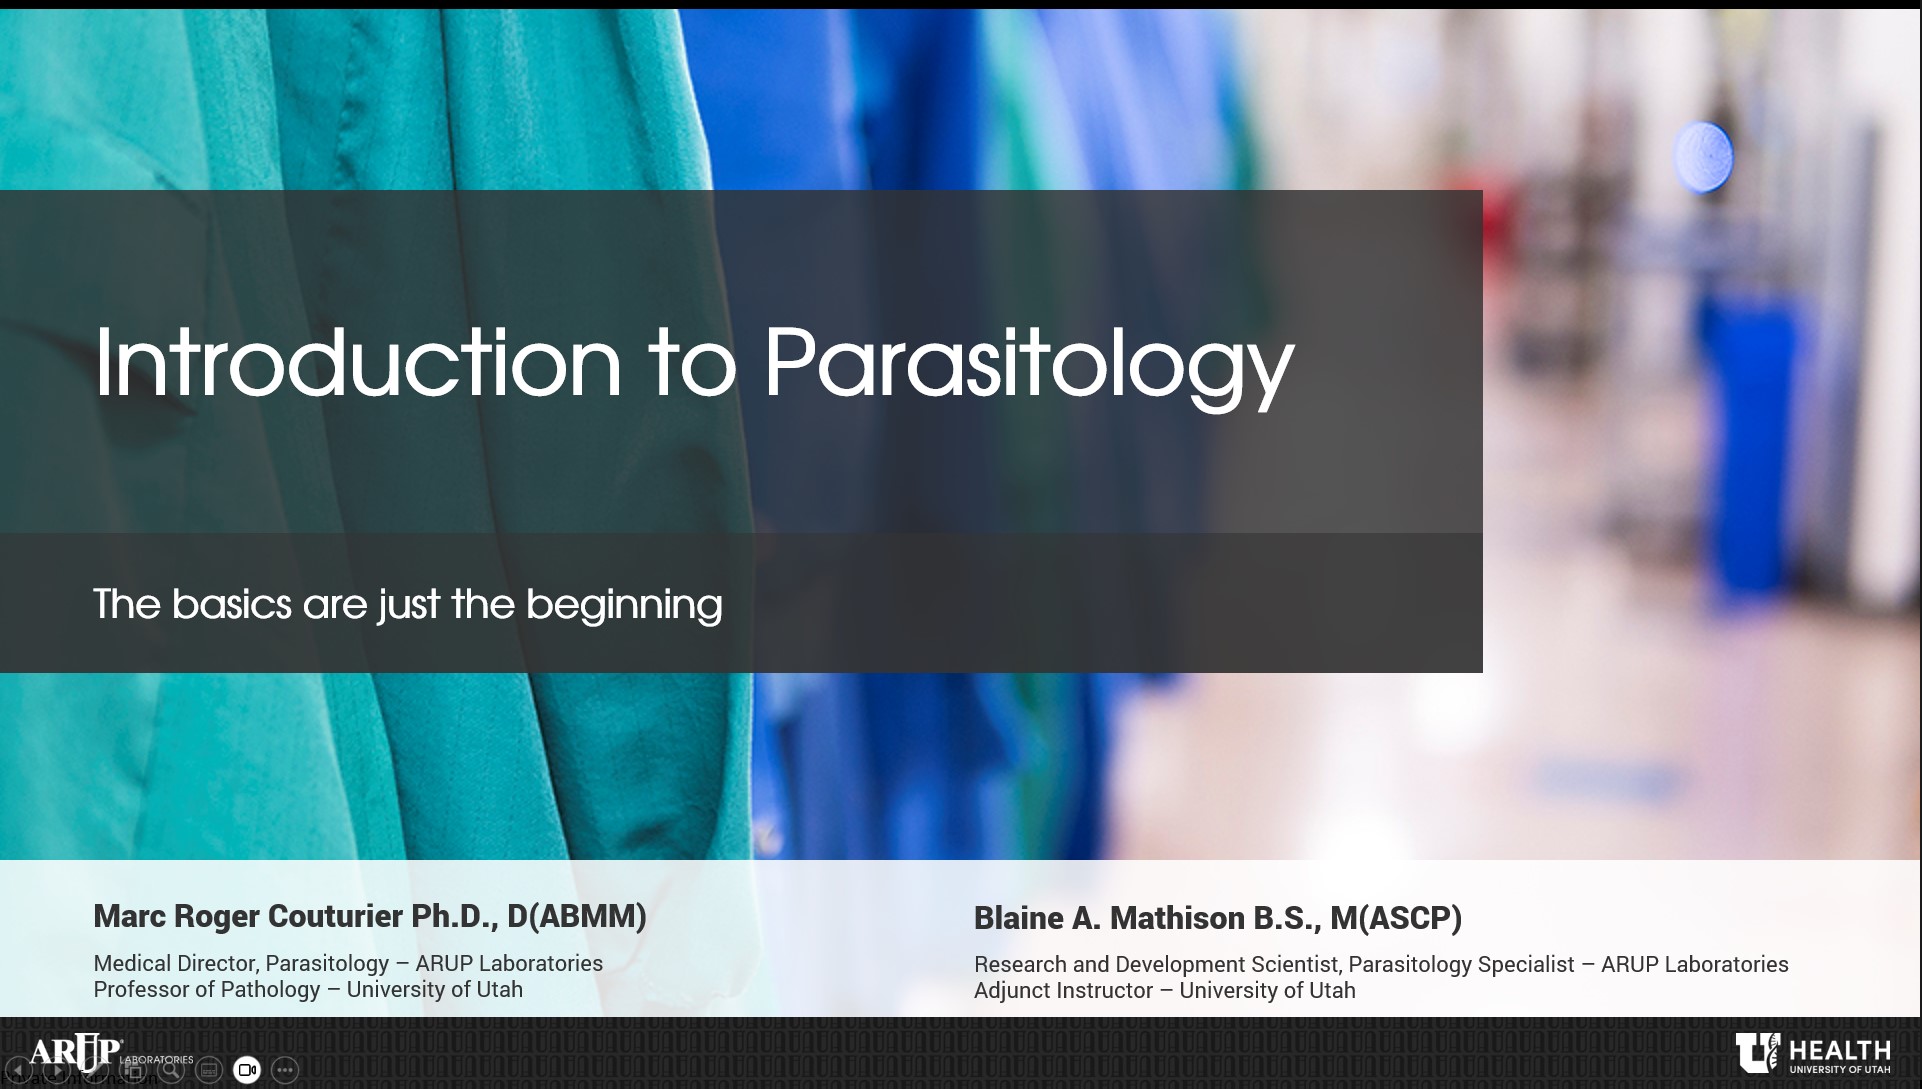 Introduction to Parasitology: The Basics Are Just the Beginning